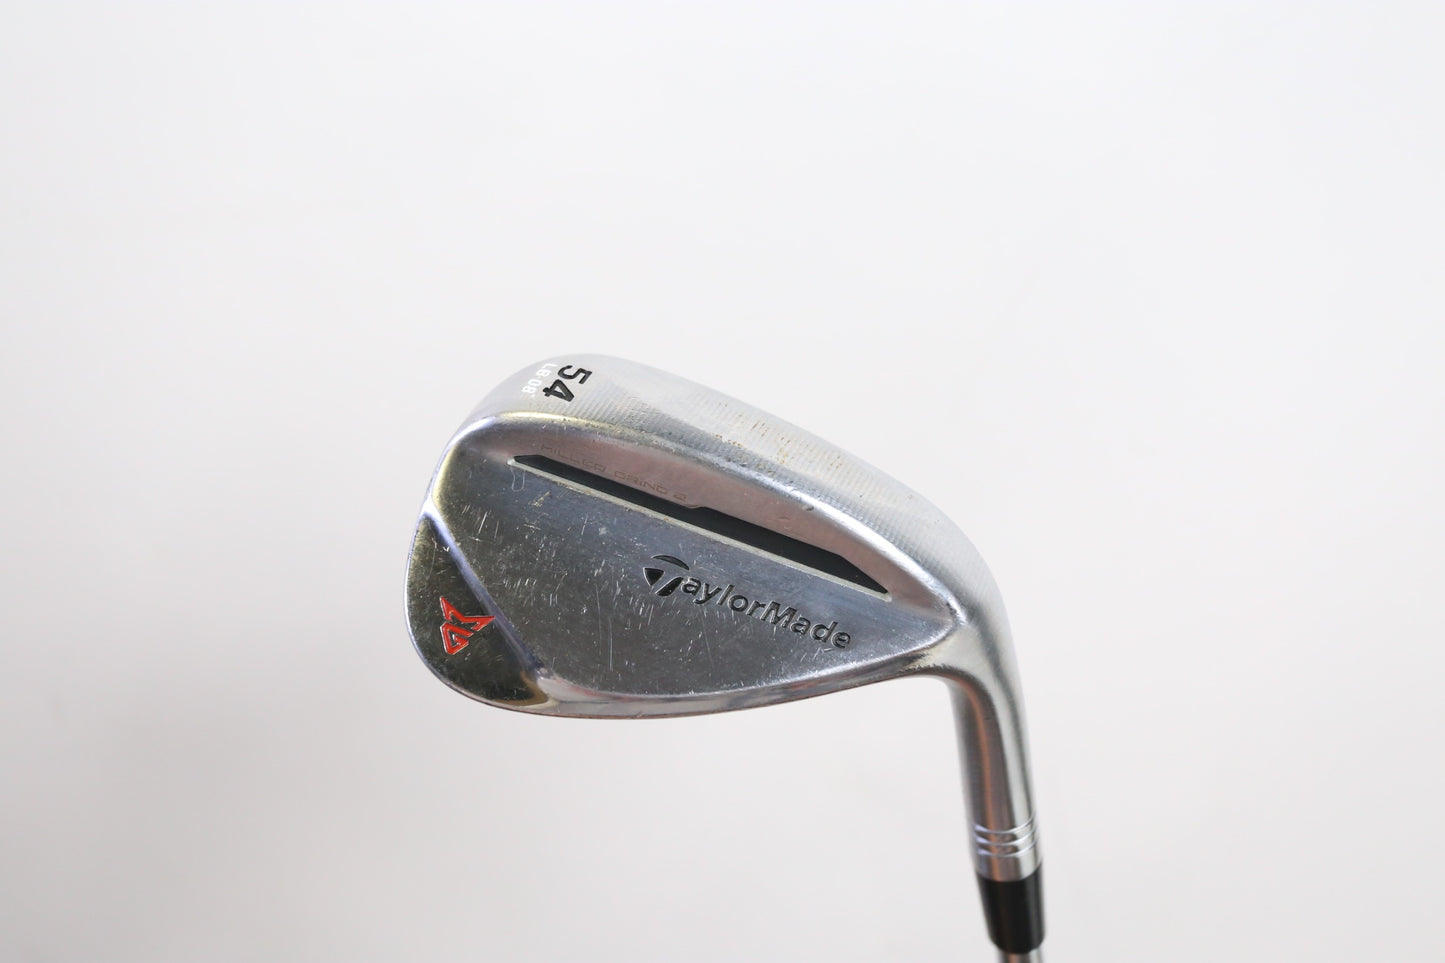 Used TaylorMade MG2 Chrome LB Sand Wedge - Right-Handed - 54 Degrees - Stiff Flex